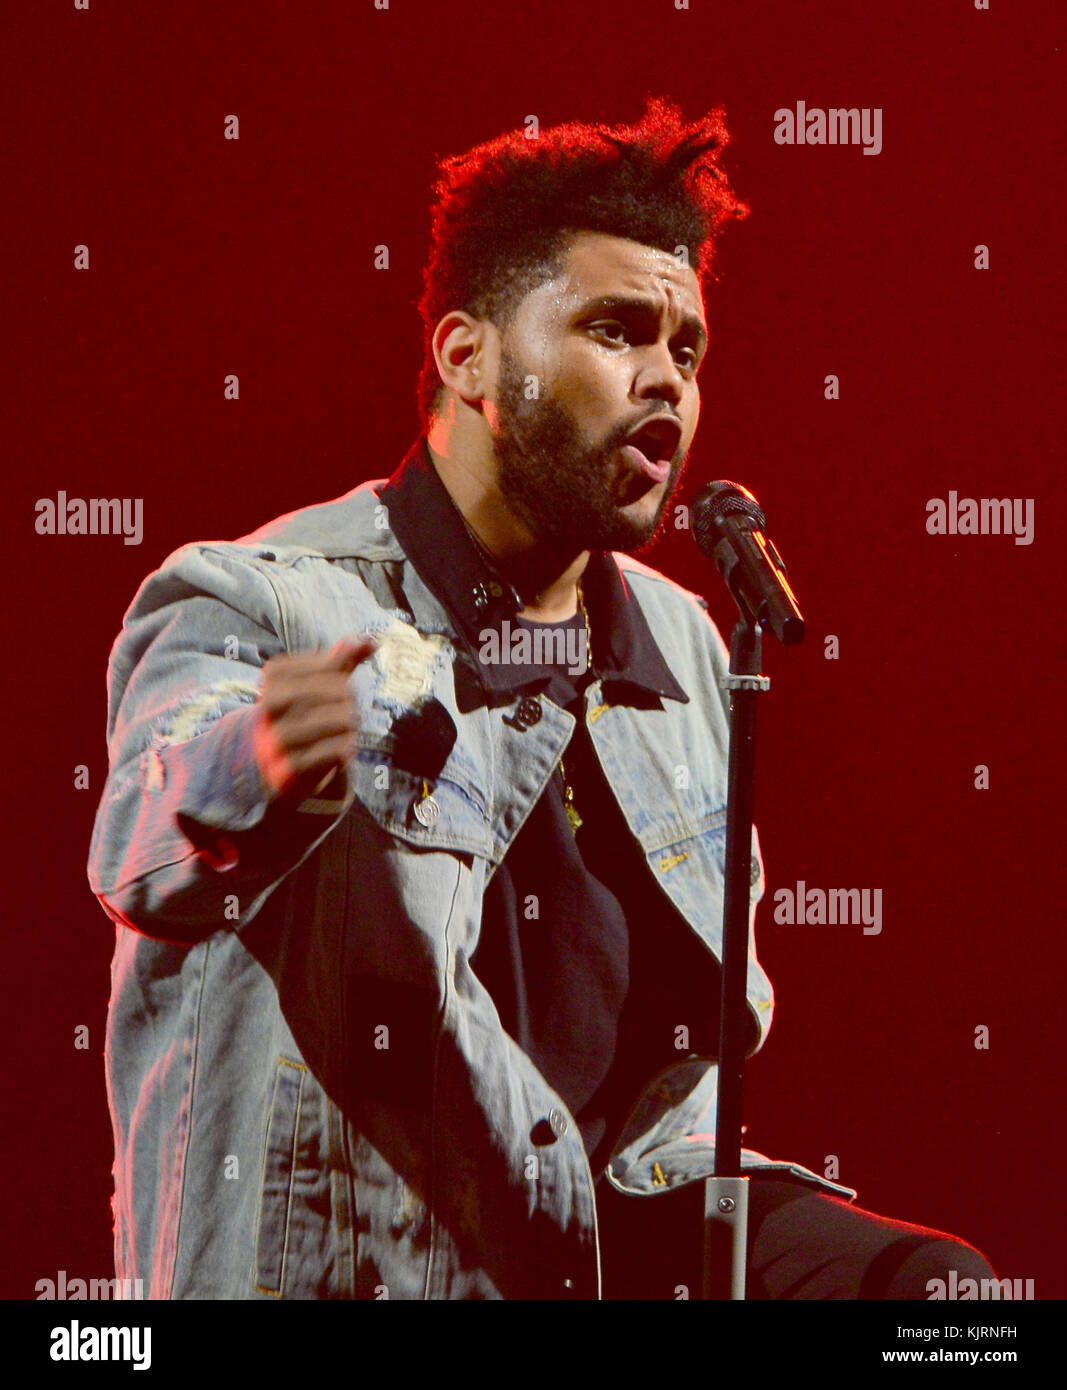 The Weeknd Instagram Pic December 23, 2018 – Star Style Man